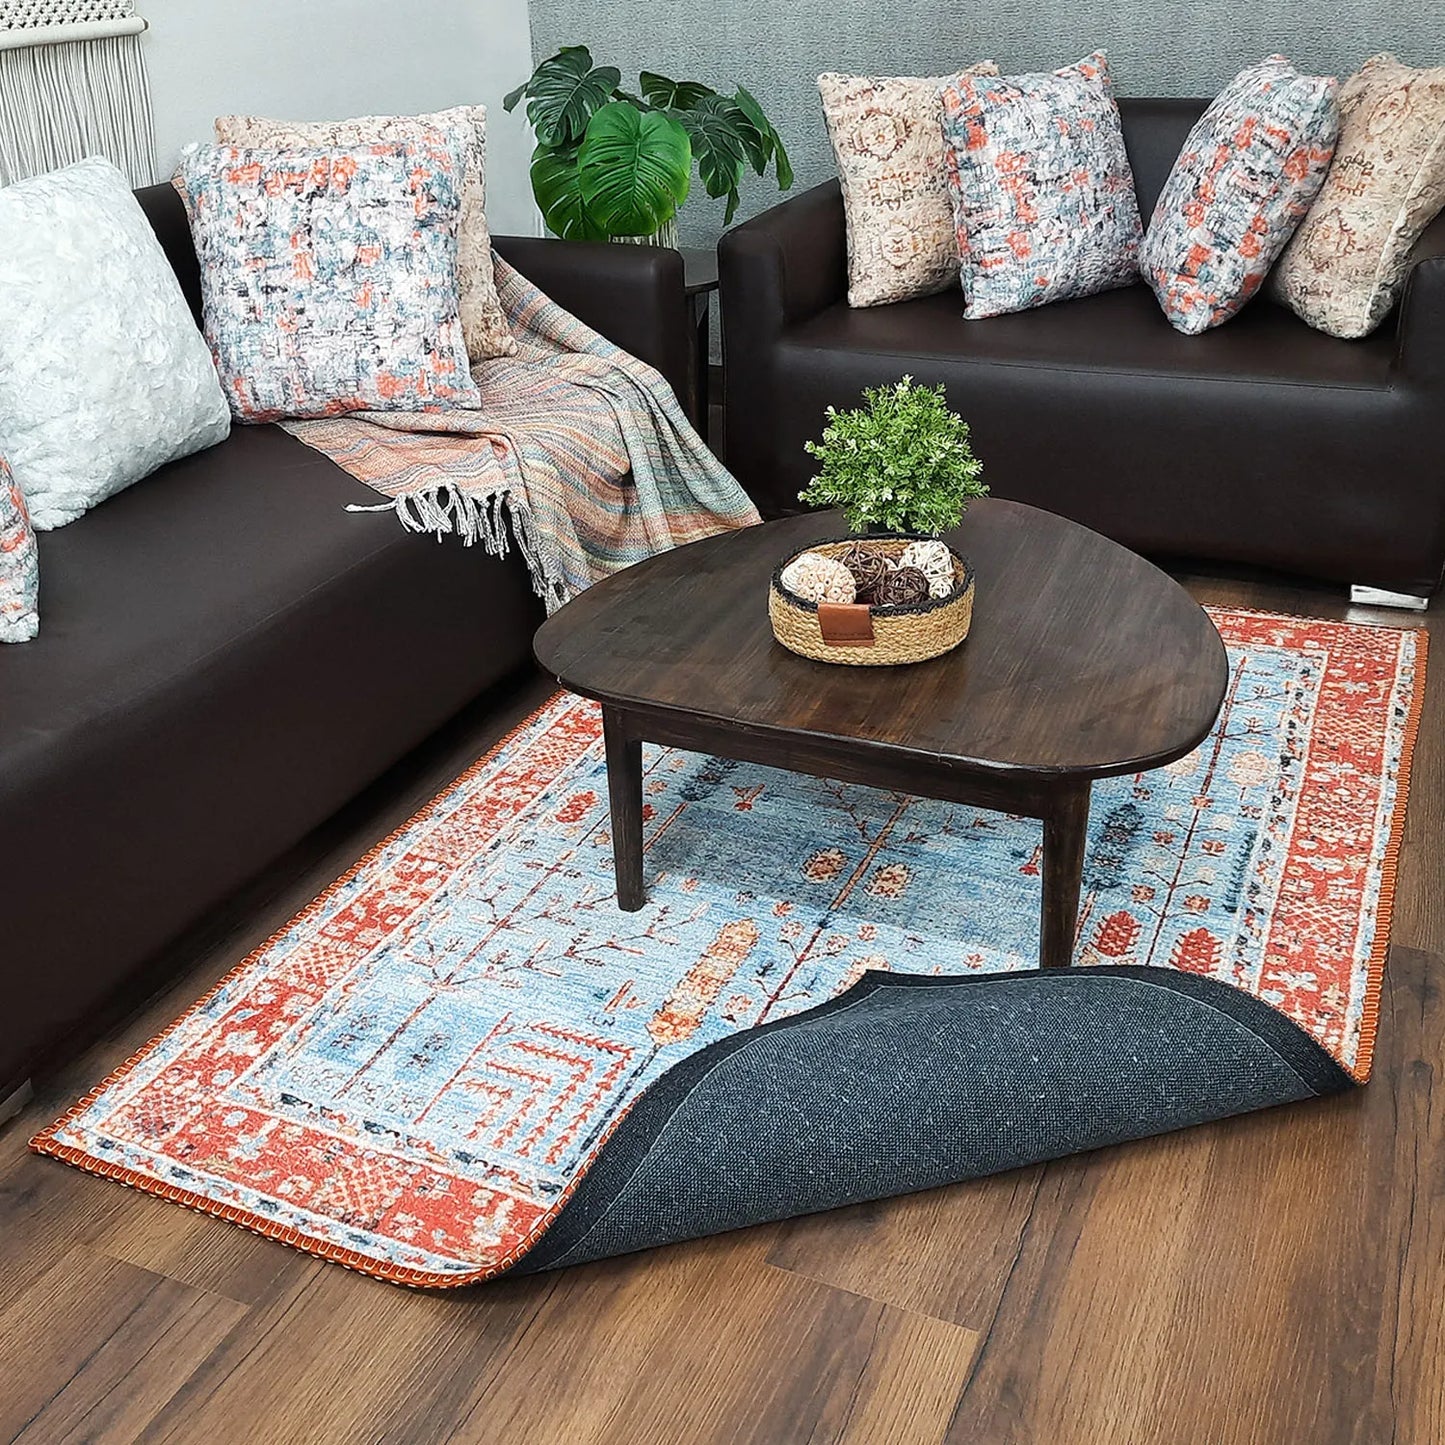 Avioni Home Faux Silk Carpet for Your Living Room | Persian Design | Durable and Washable | BrickLane Collection